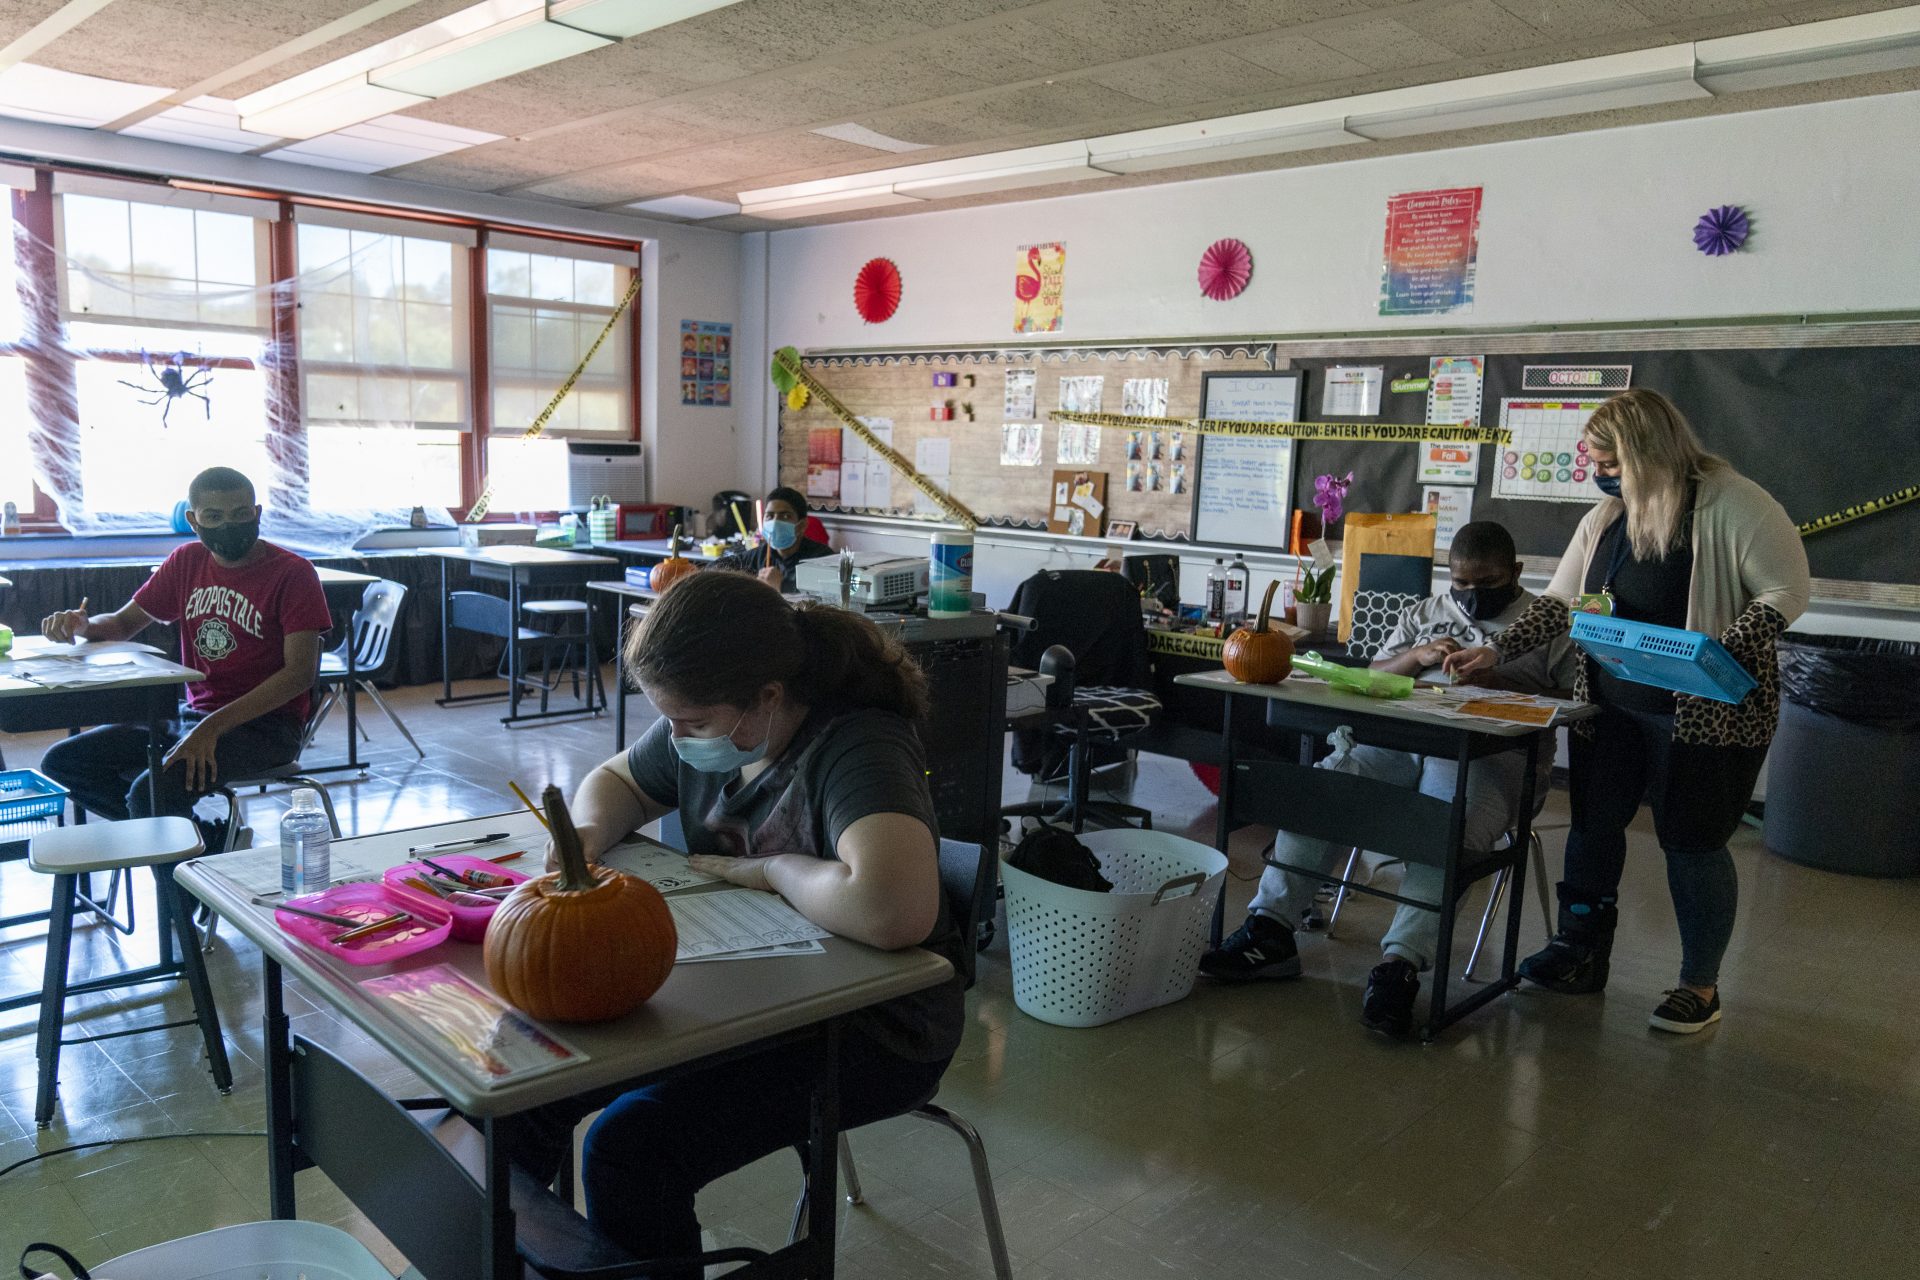 Marissa De Gaetano, right, teaches an autism class at Roosevelt High School - Early College Studies, Thursday, Oct. 15, 2020, in Yonkers, N.Y.